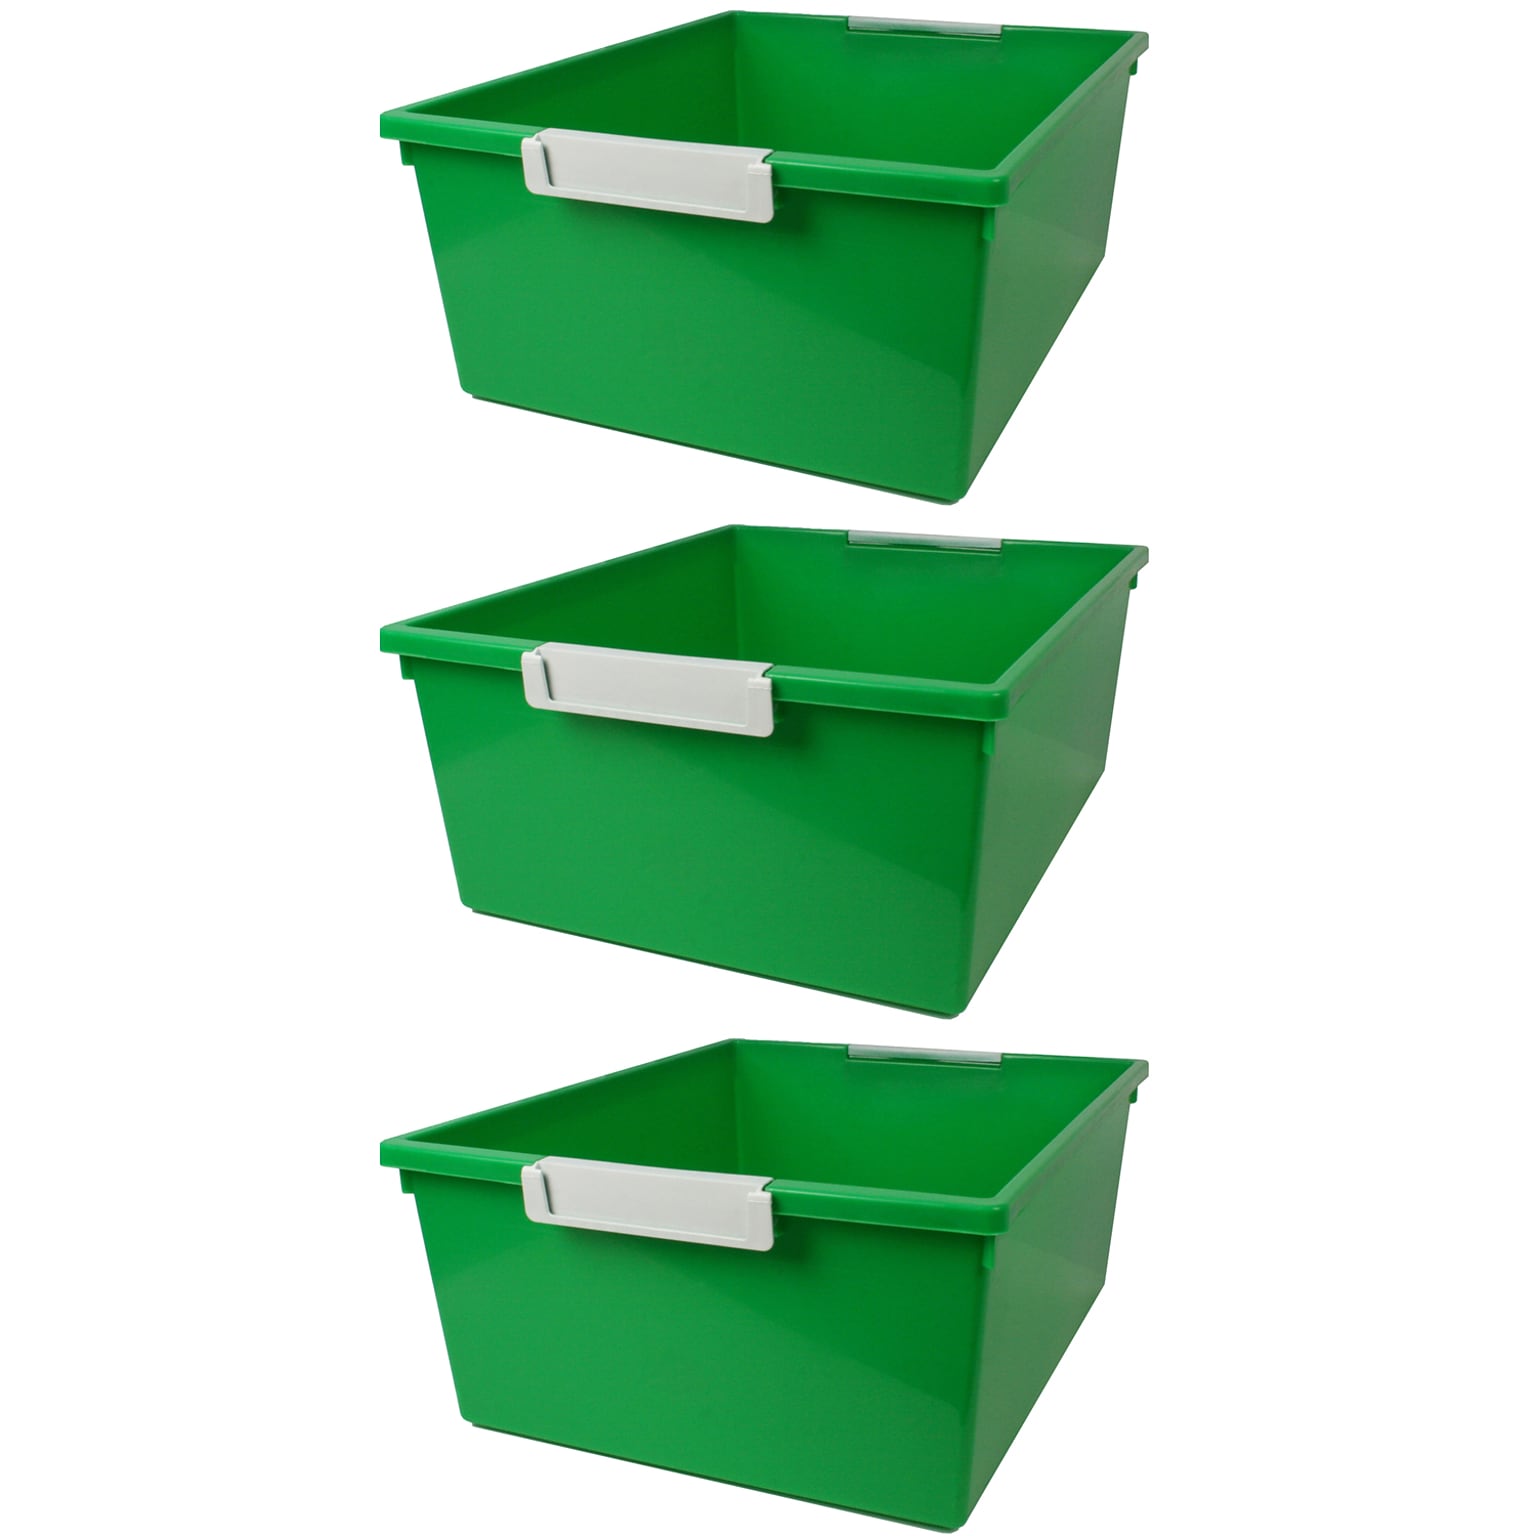 Romanoff Plastic 12QT Tattle® Tray with Label Holder, 14.25 x 11.5 x 5.75, Green, Pack of 3 (ROM53605-3)